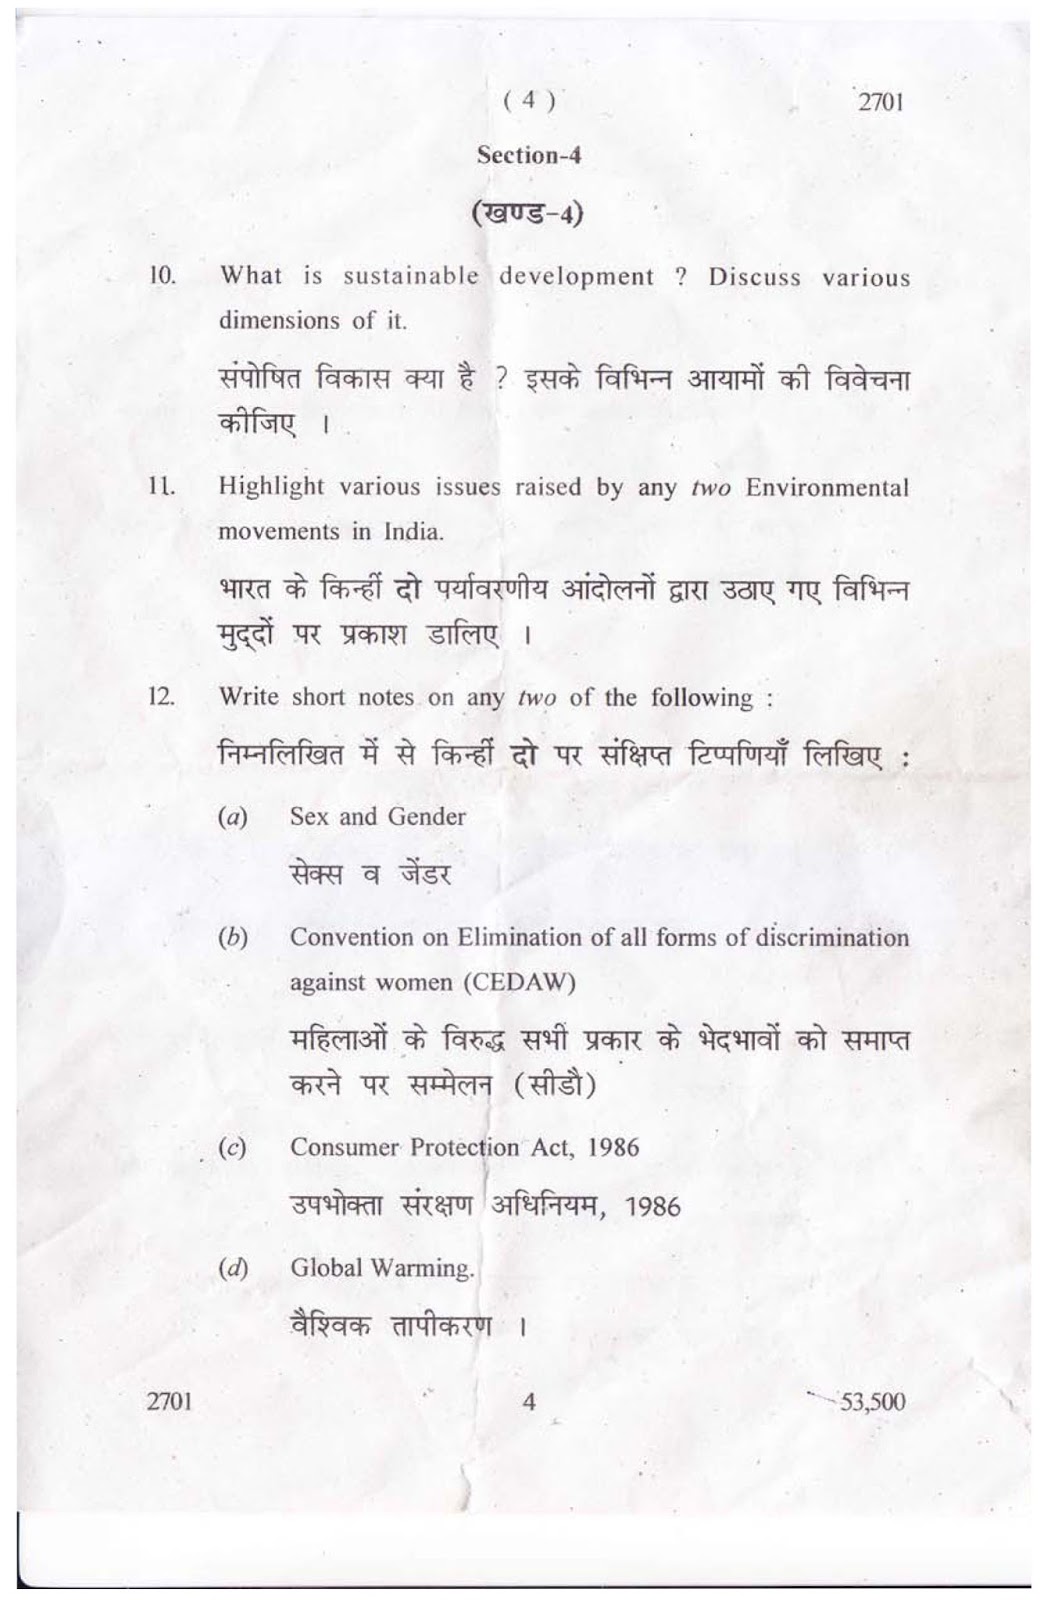 human rights question paper 2021